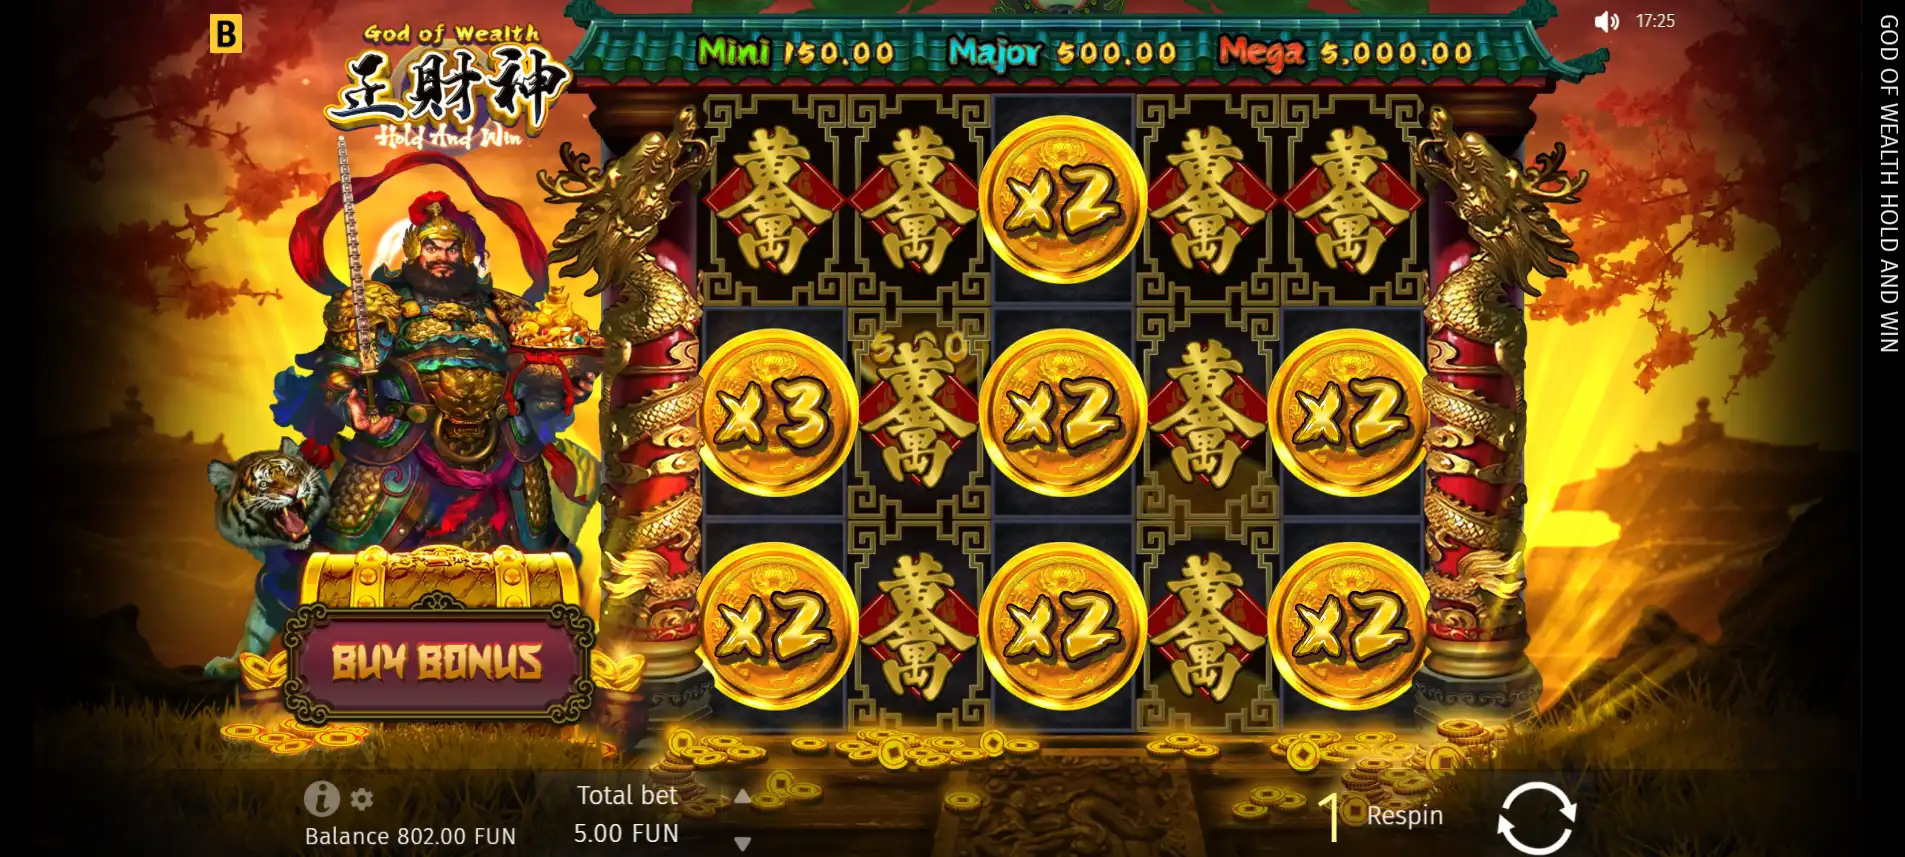 A gameplay image of bGaming's God of Wealth Hold and Win